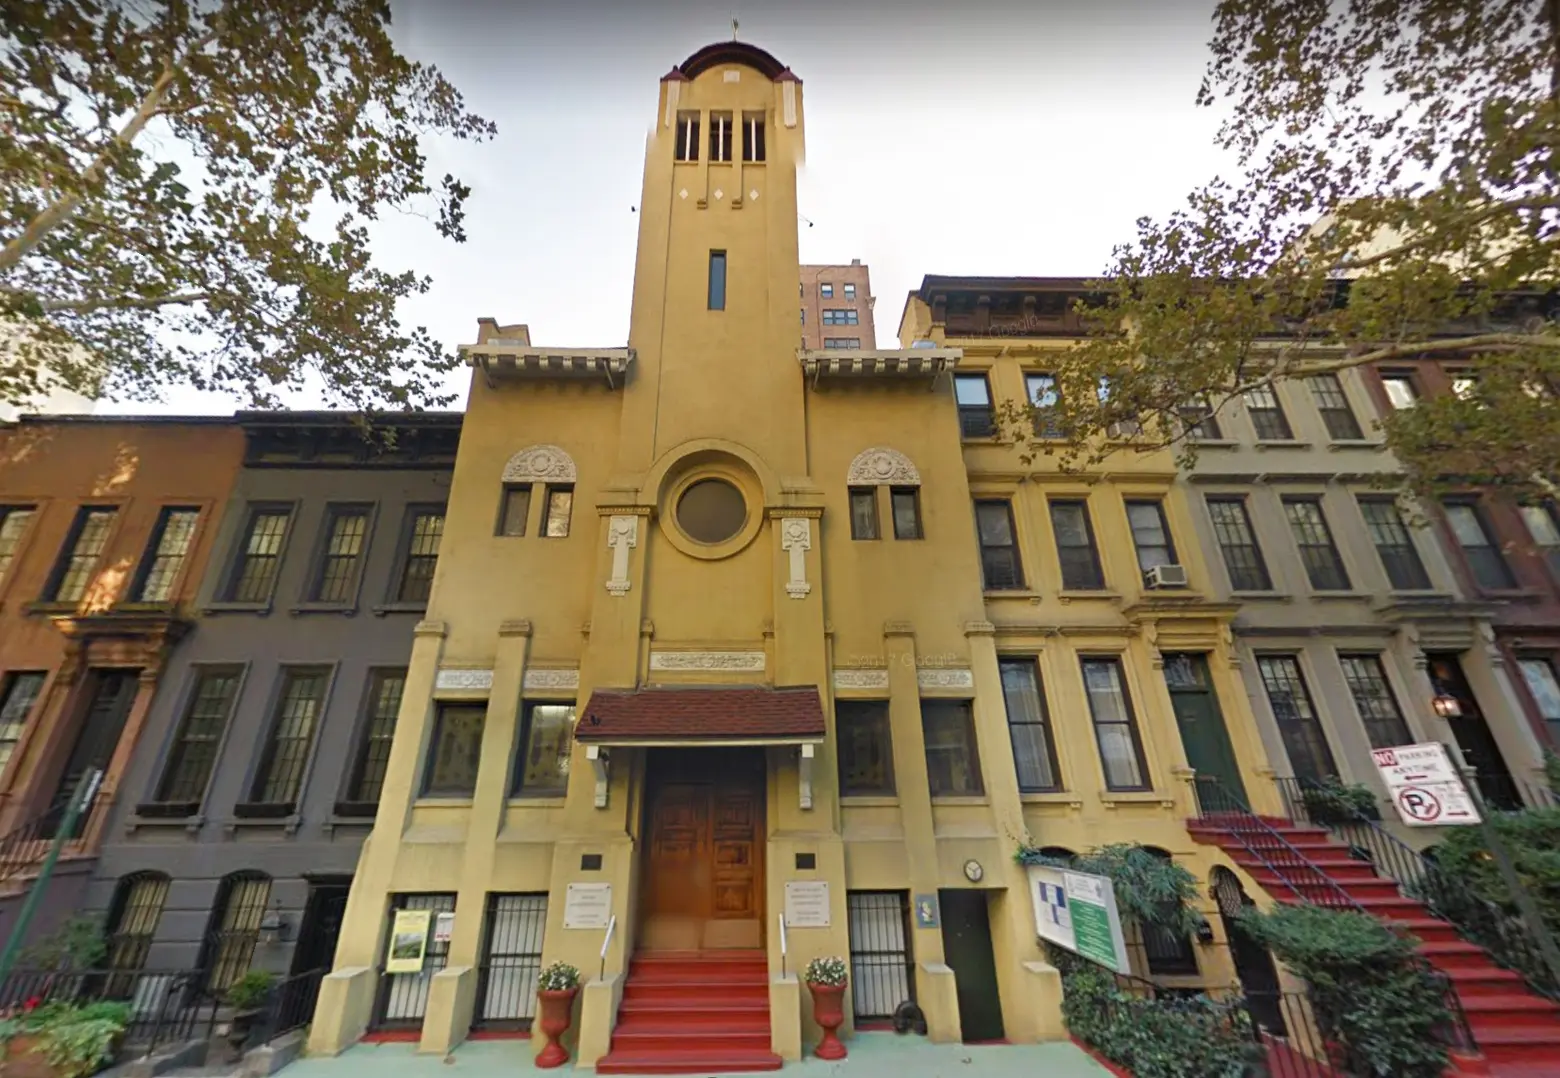 On the Upper East Side, Emery Roth’s First Hungarian Church of New York may become a landmark